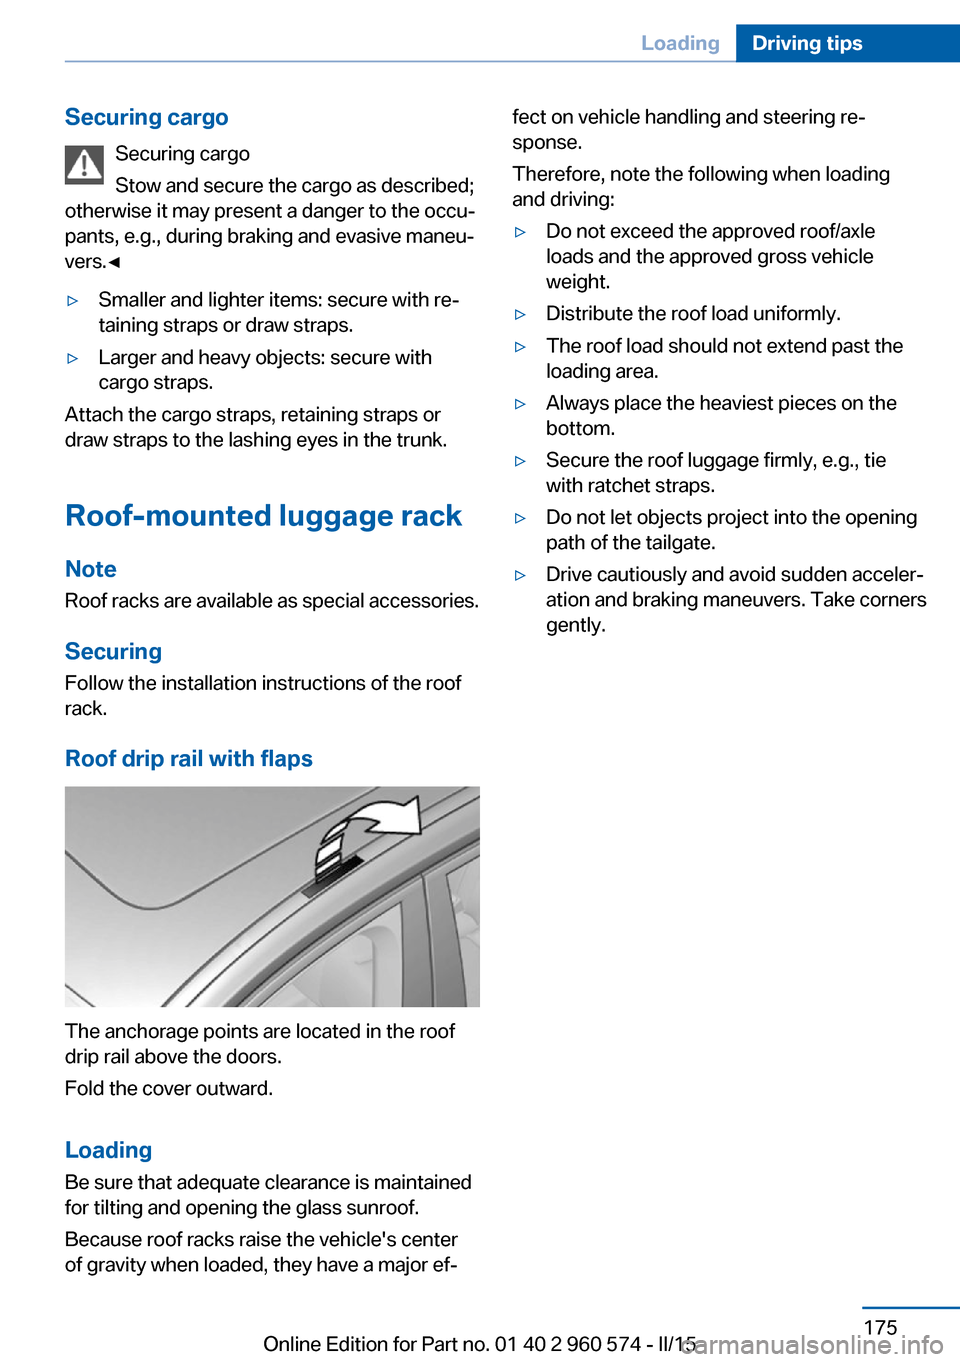 BMW 3 SERIES GRAN TURISMO 2016 F34 User Guide Securing cargoSecuring cargo
Stow and secure the cargo as described;
otherwise it may present a danger to the occu‐
pants, e.g., during braking and evasive maneu‐
vers.◀▷Smaller and lighter it